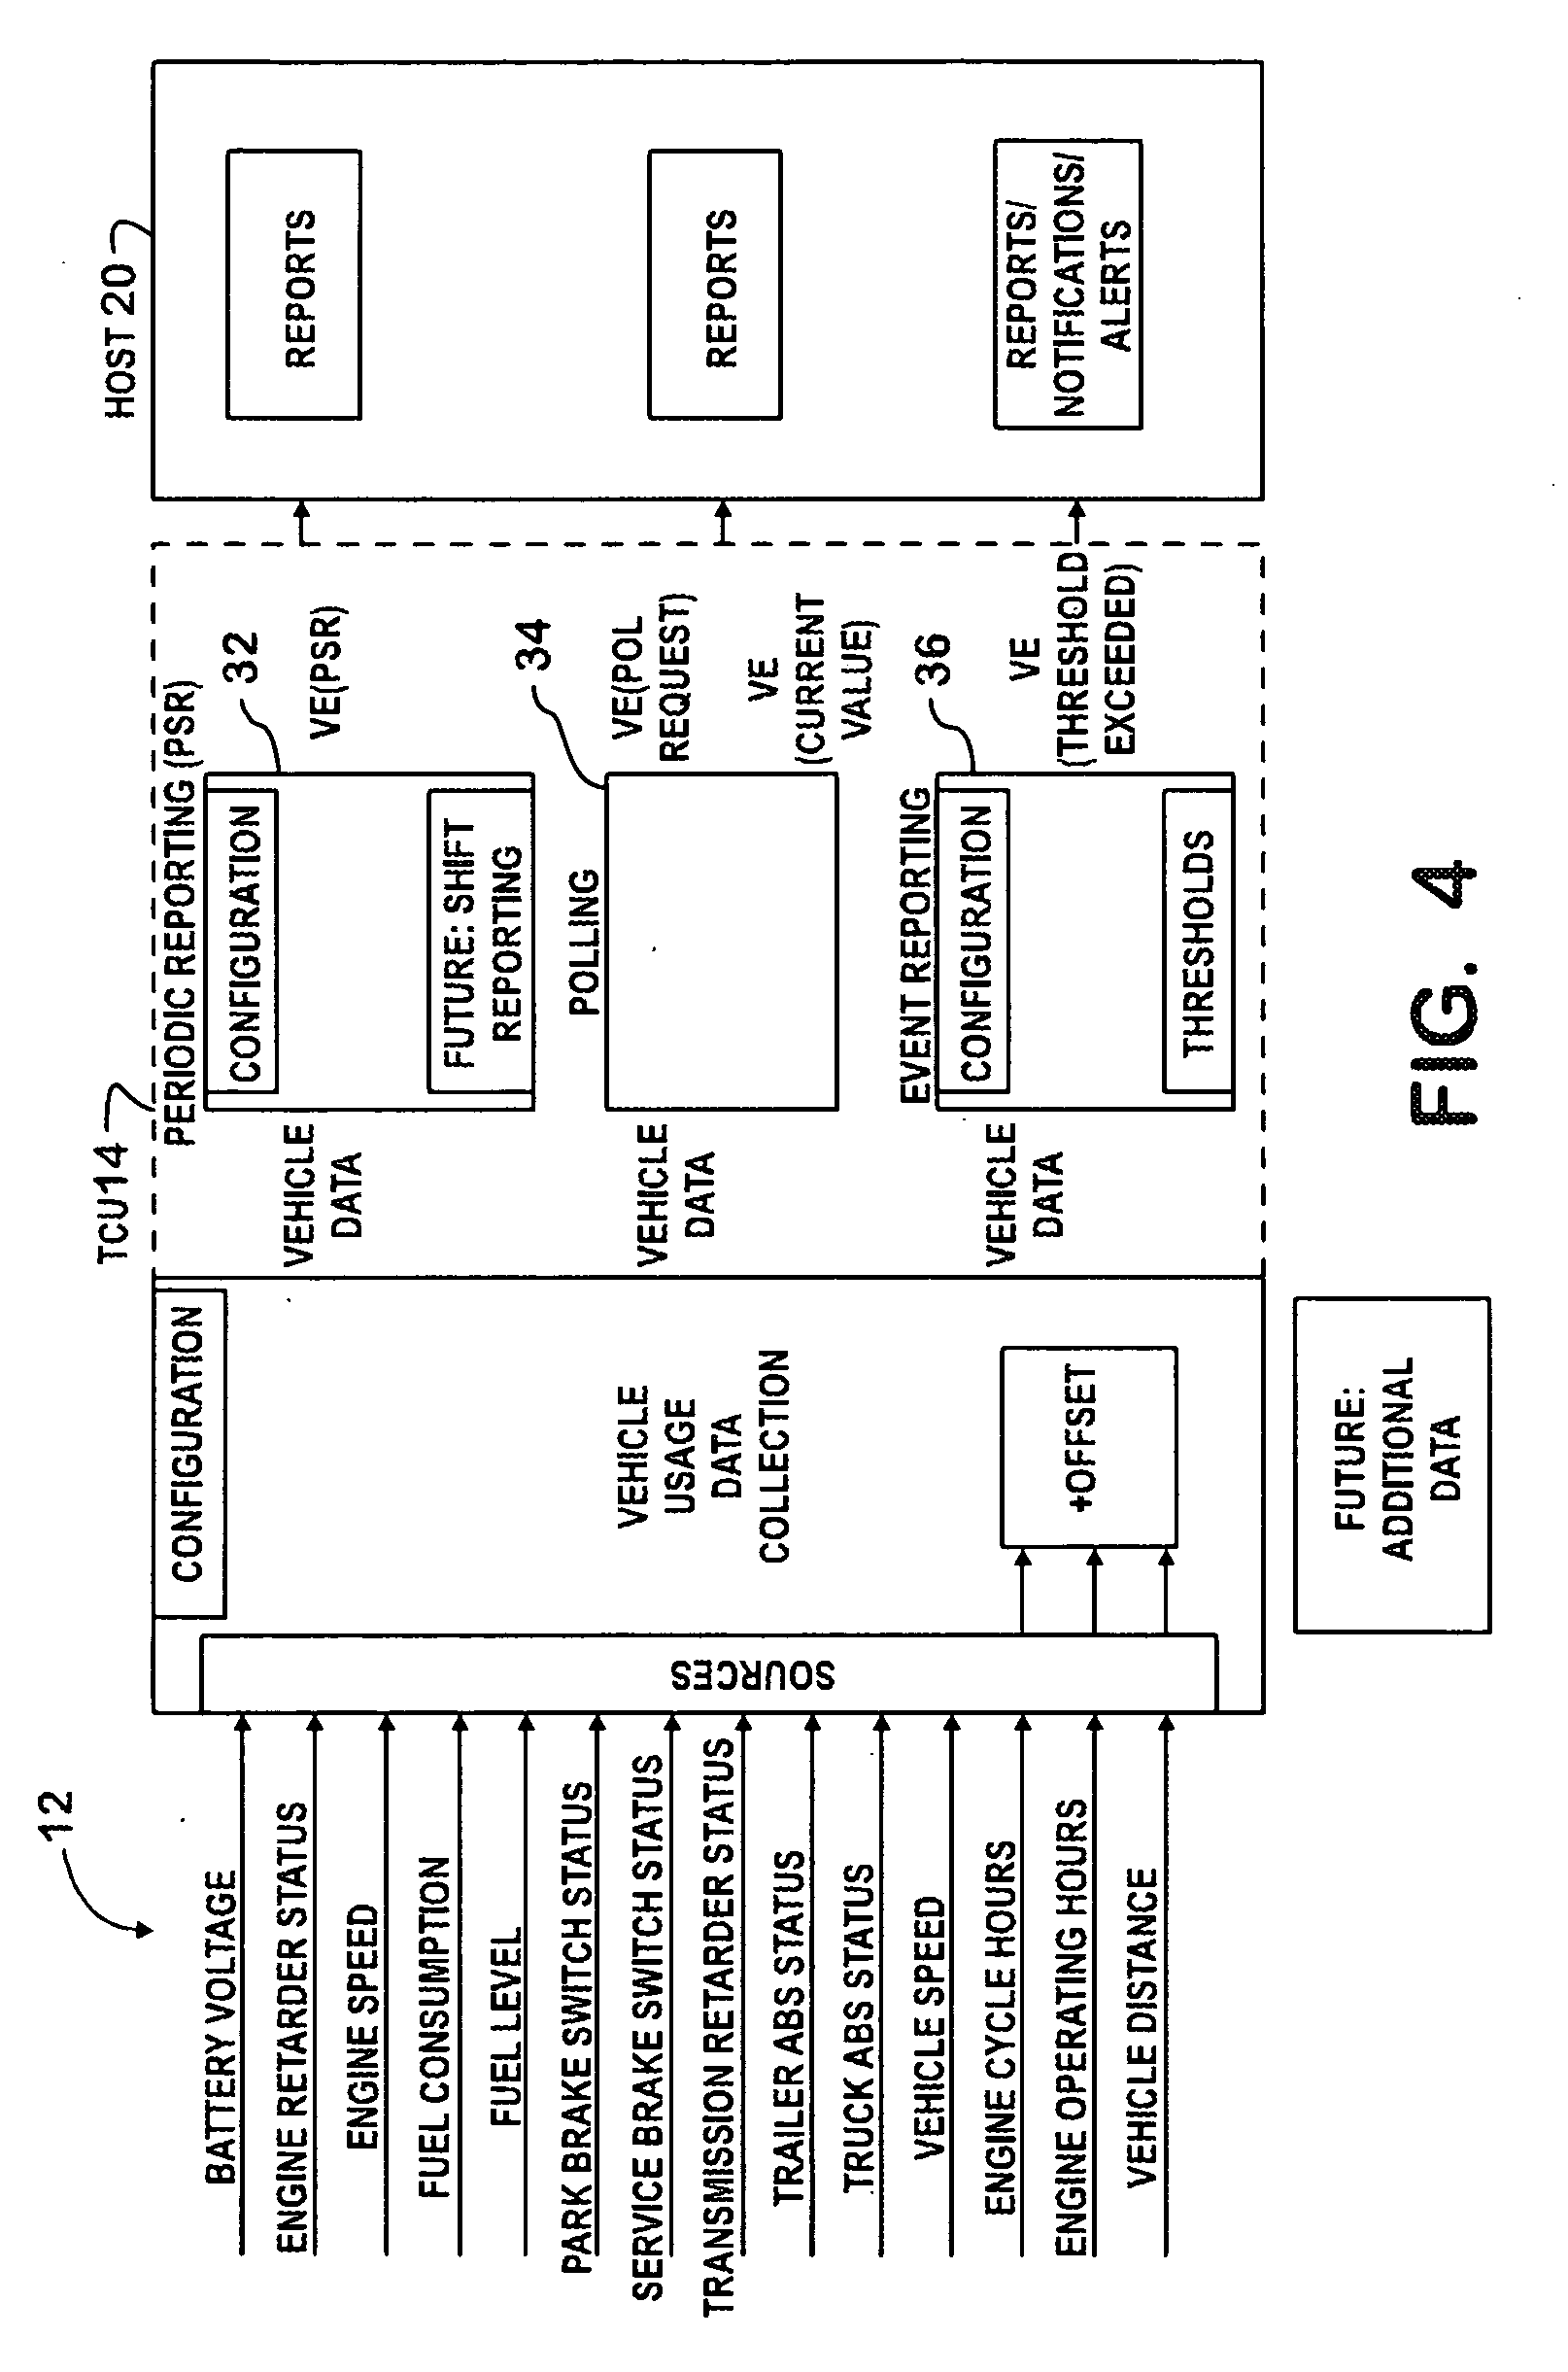 Compiling Source Information From A Motor Vehicle Data System and Configuring A Telematic Module